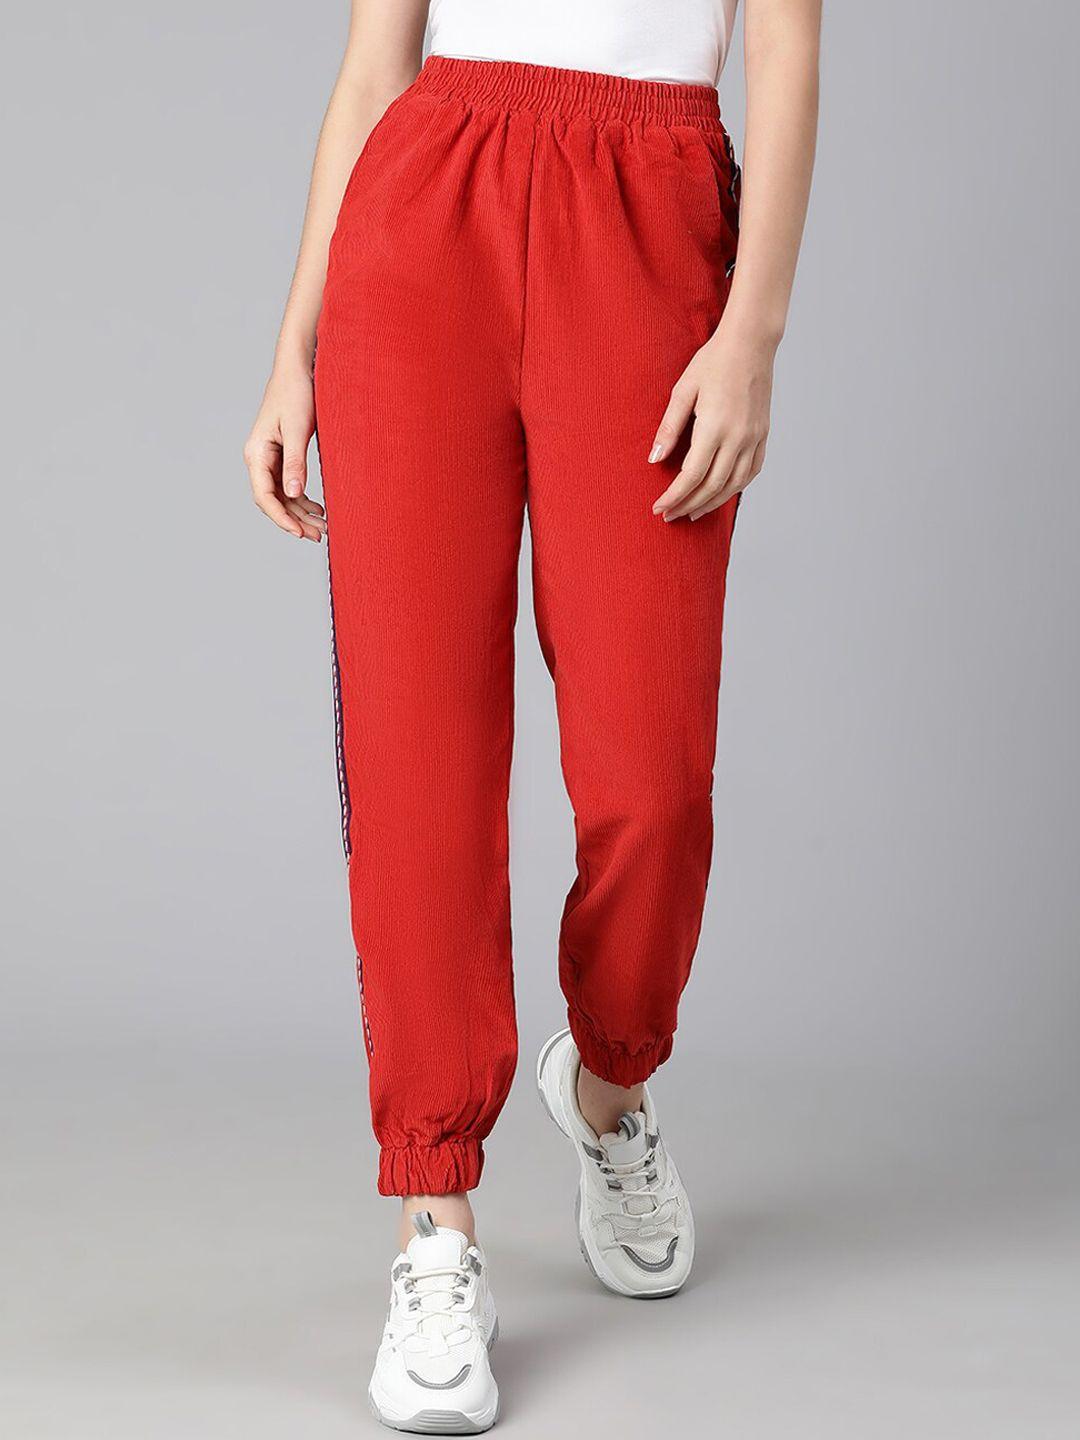 oxolloxo-women-red-joggers-trousers